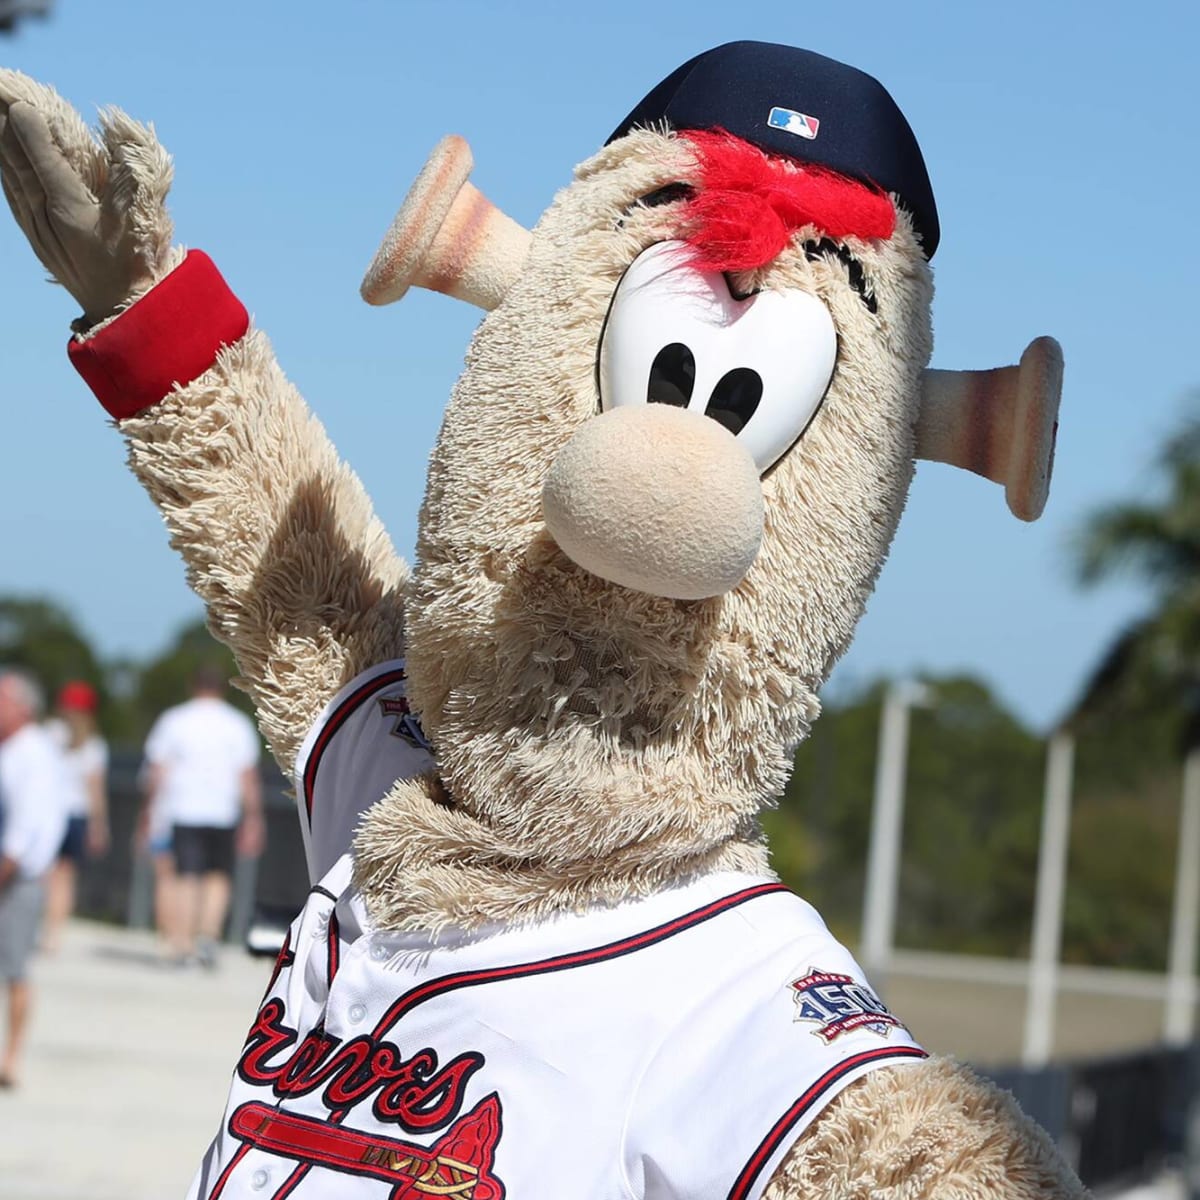 Watch: Braves mascot Blooper runs over youth football player